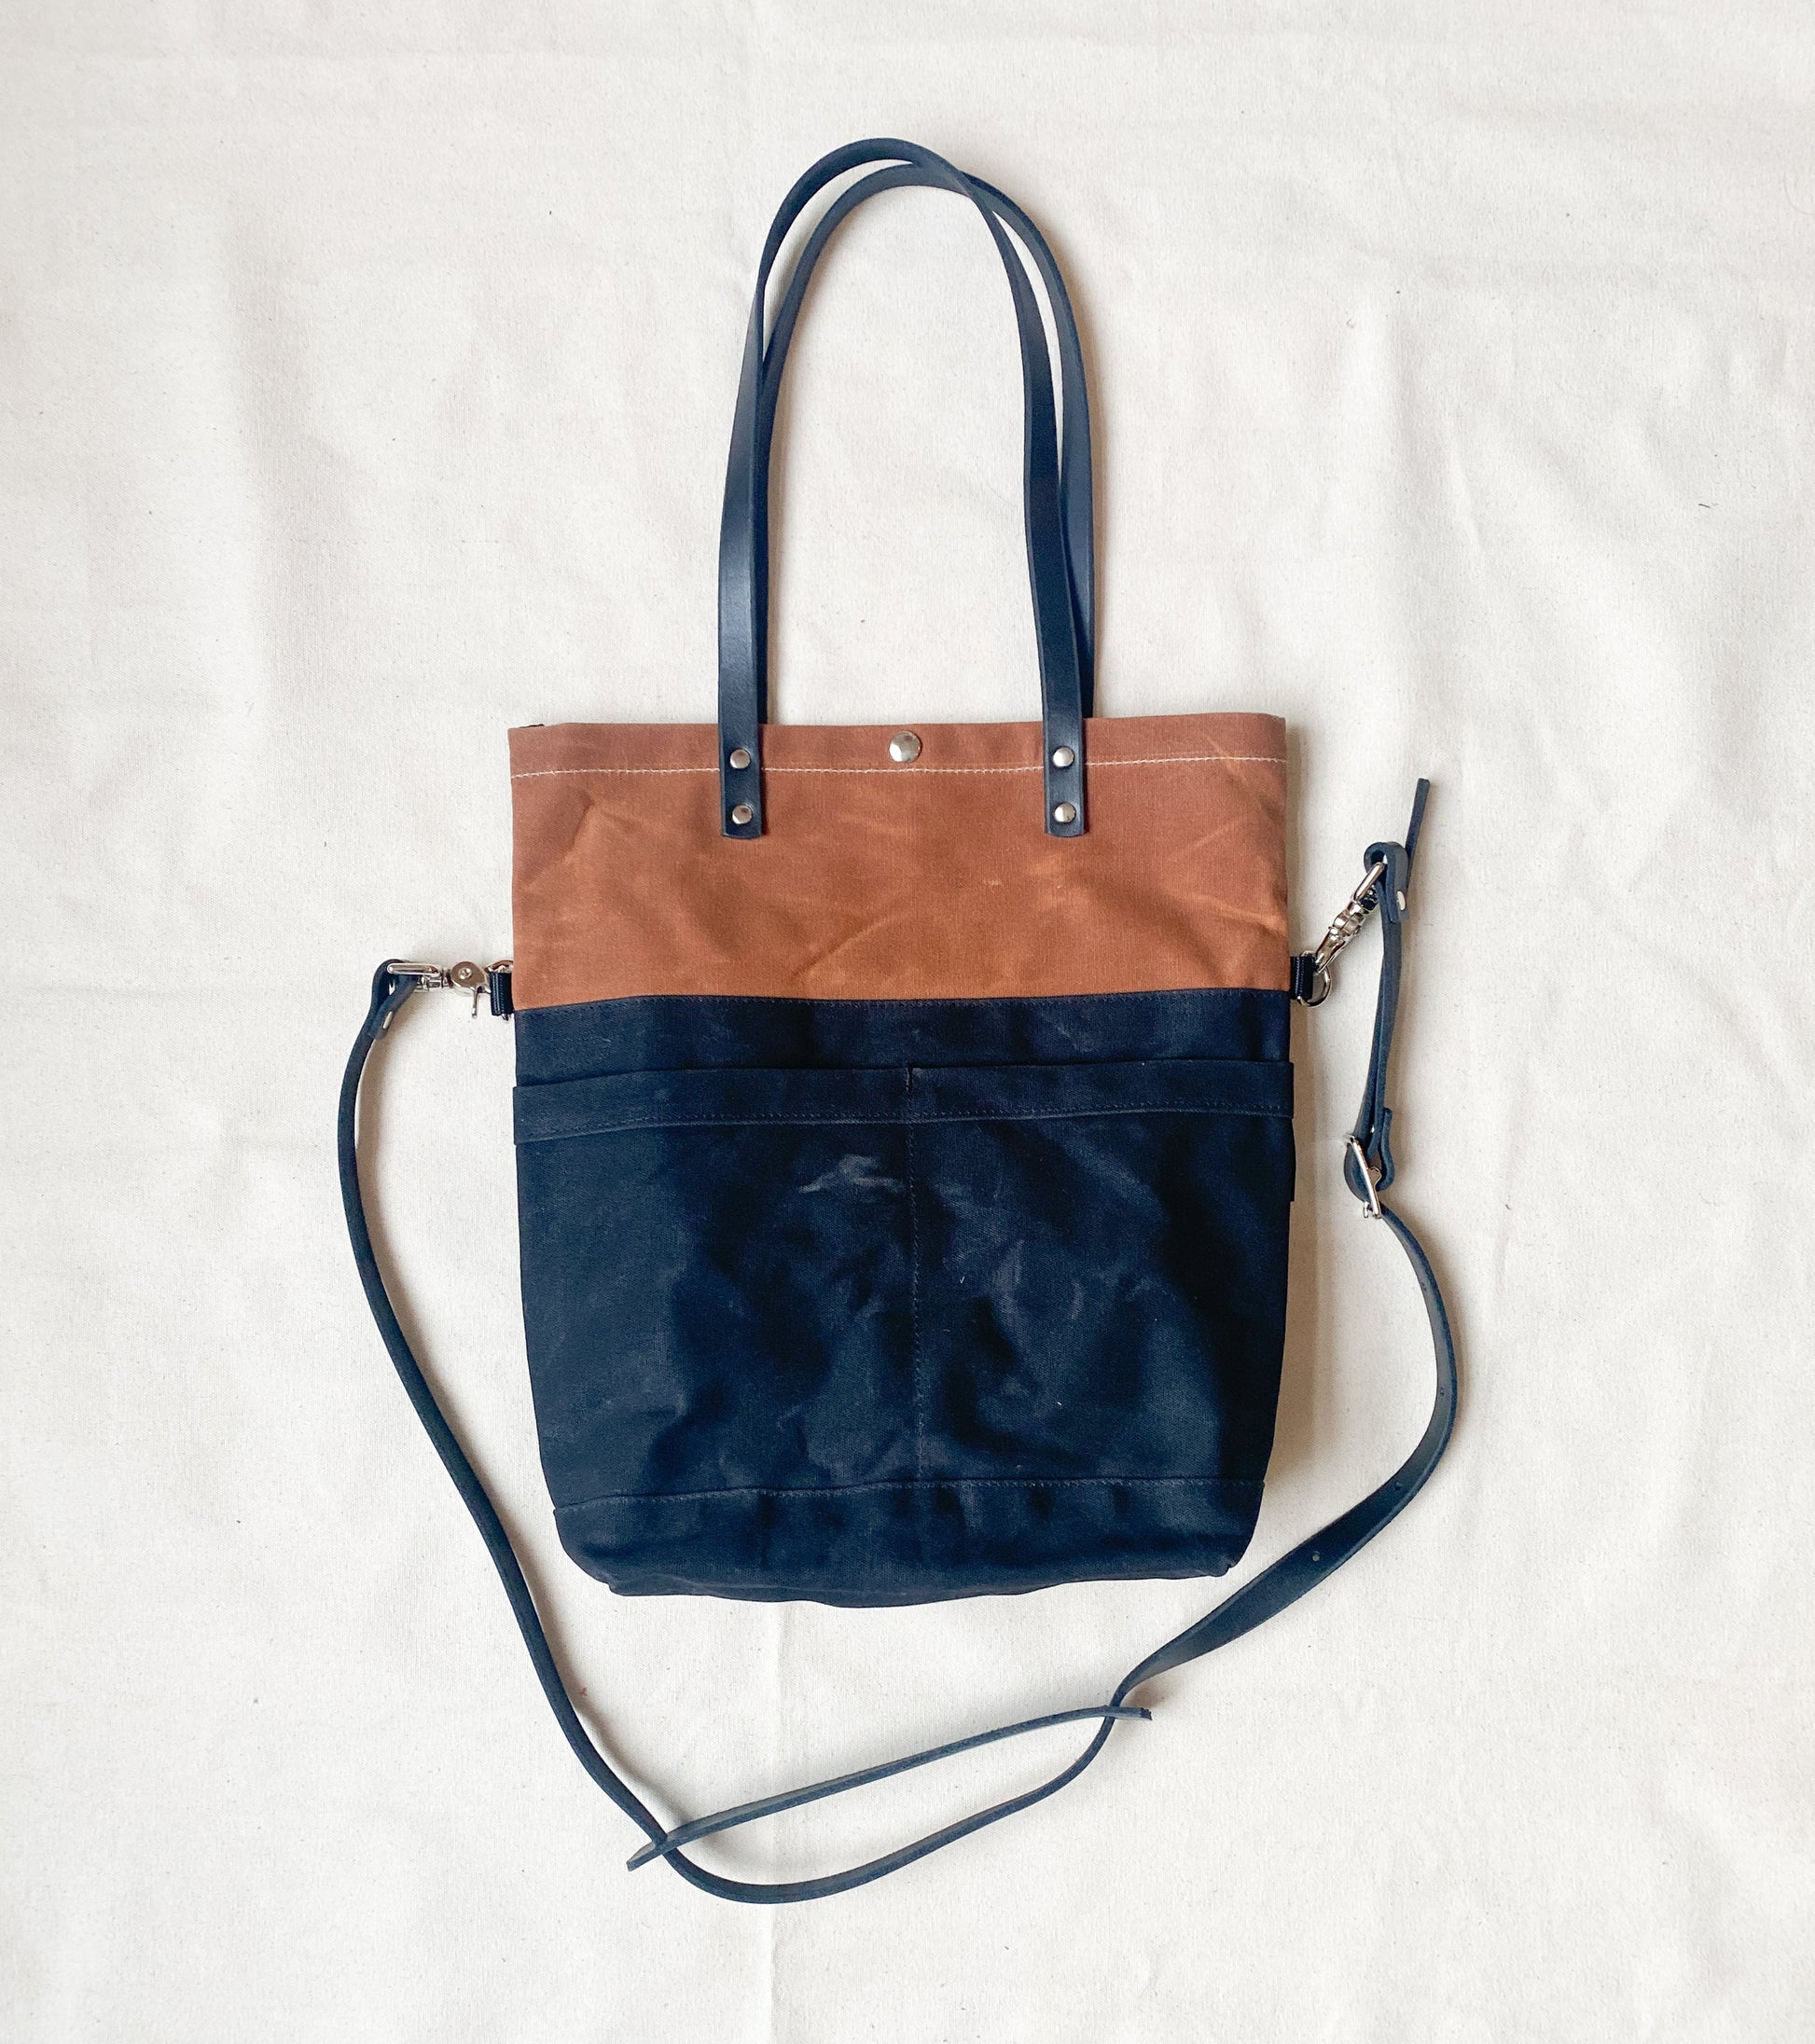 Convertible tote in tan and charcoal.